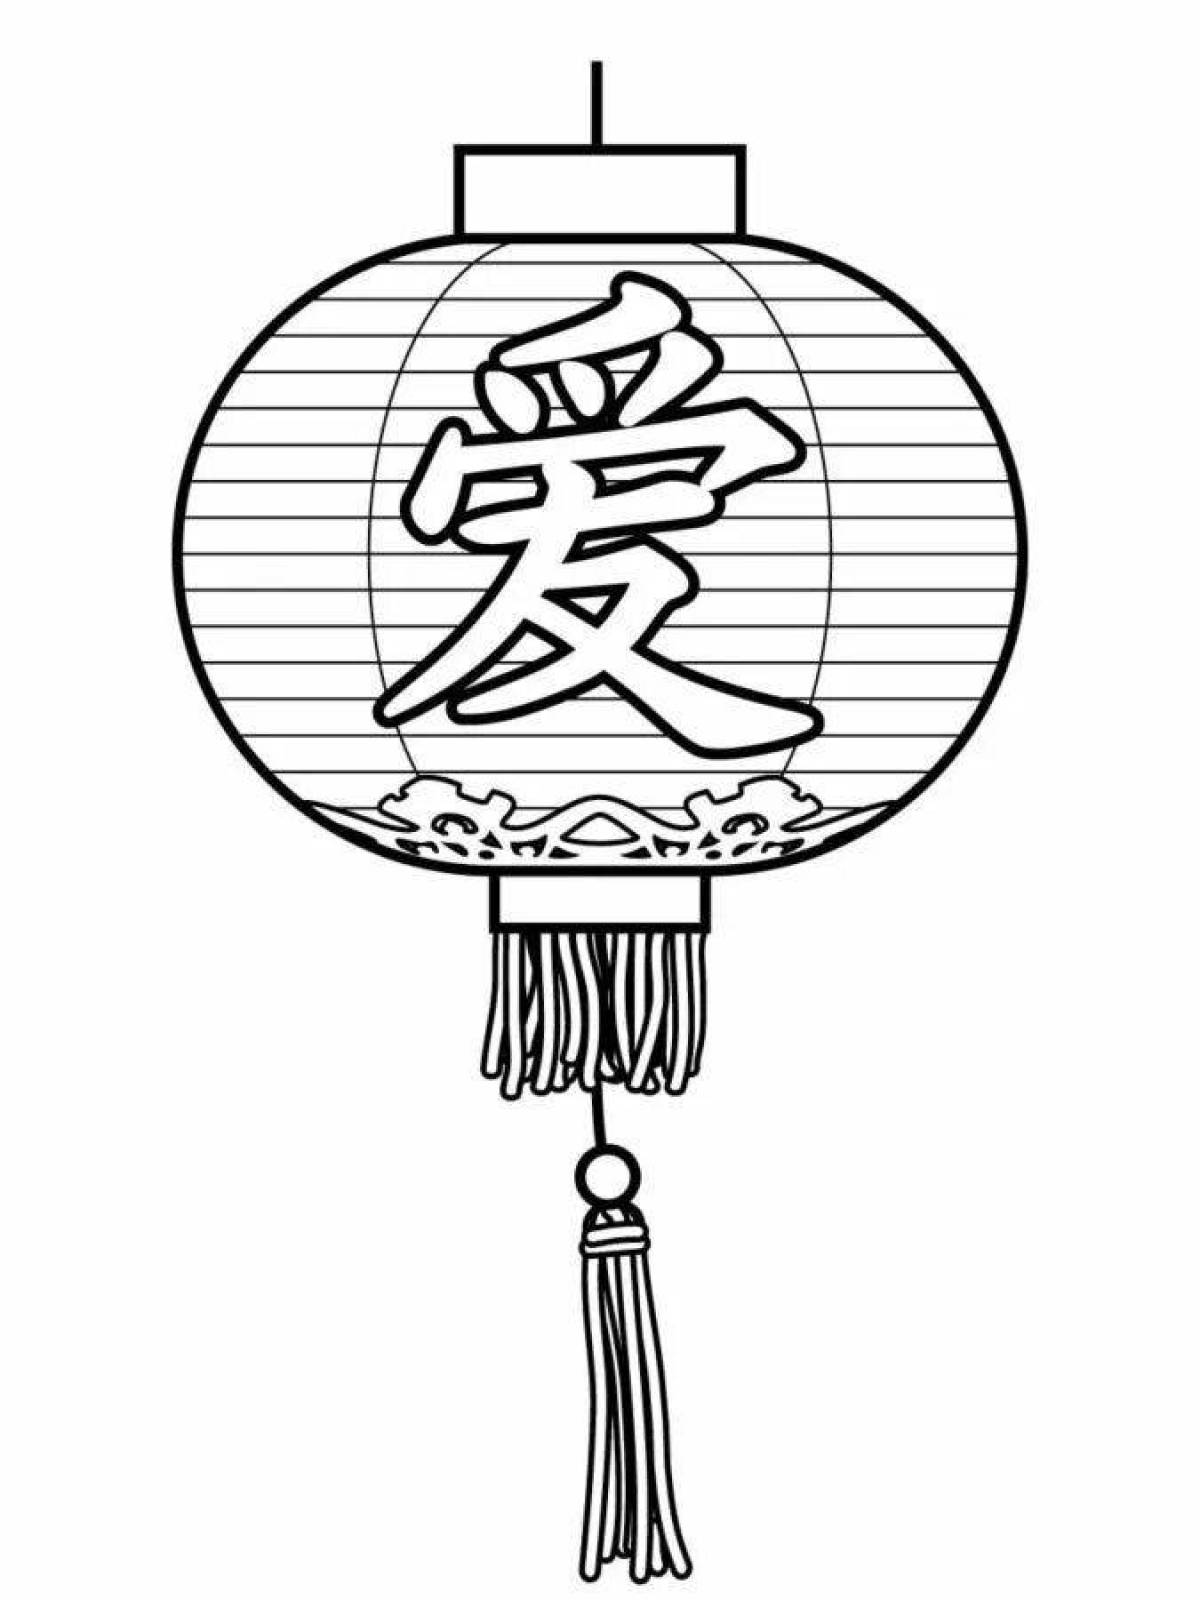 Coloring book bright Chinese lantern